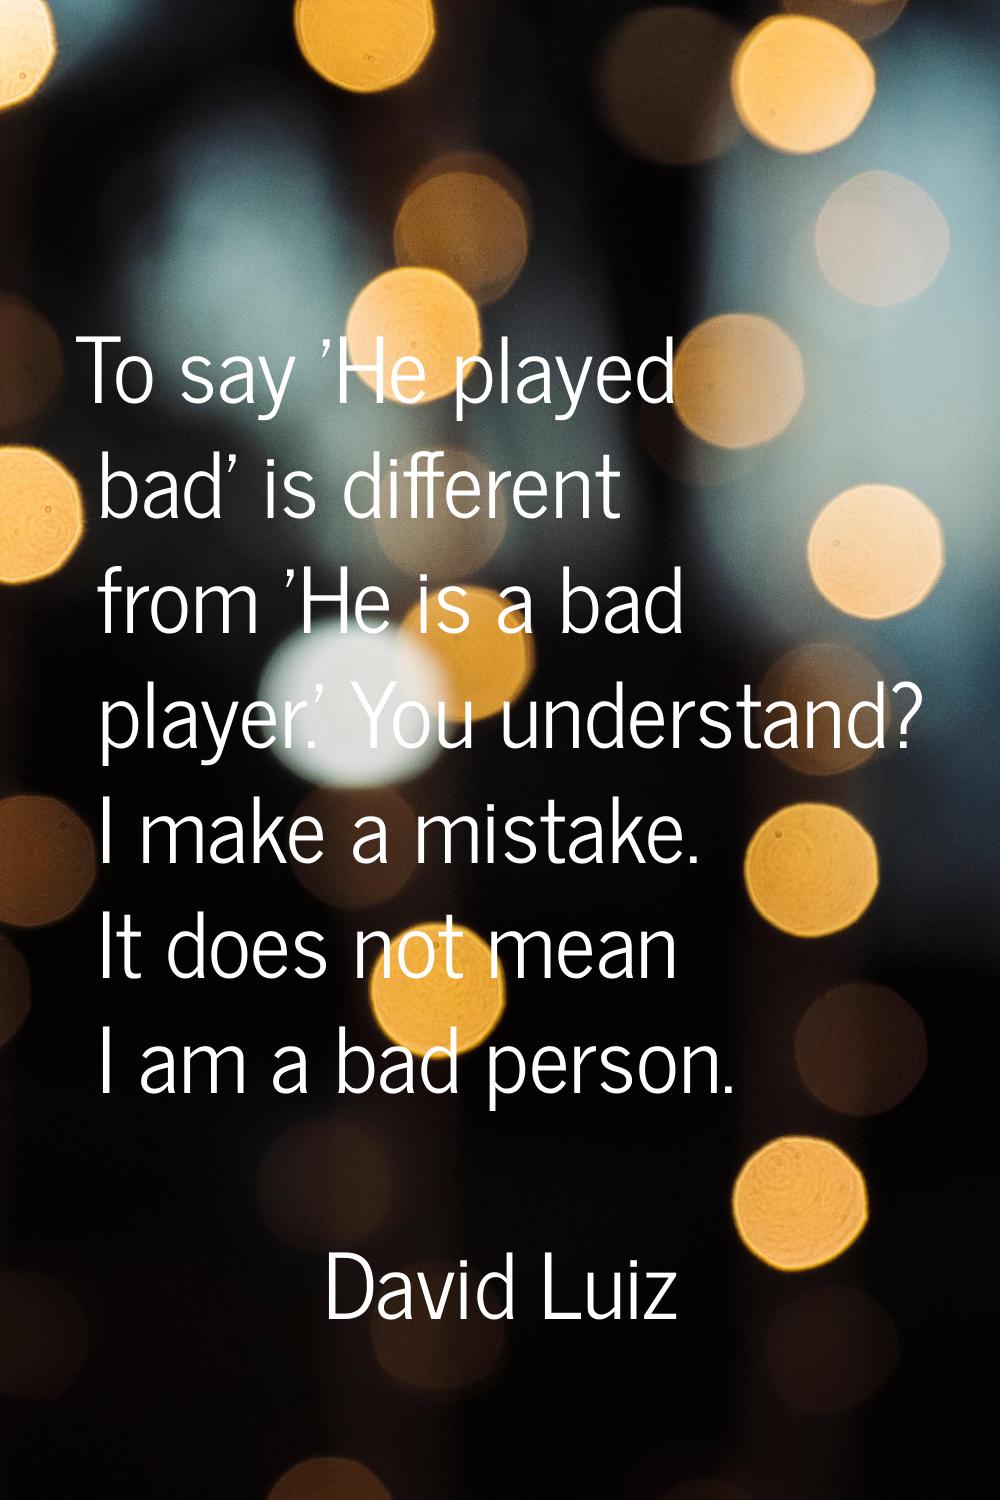 To say 'He played bad' is different from 'He is a bad player.' You understand? I make a mistake. It